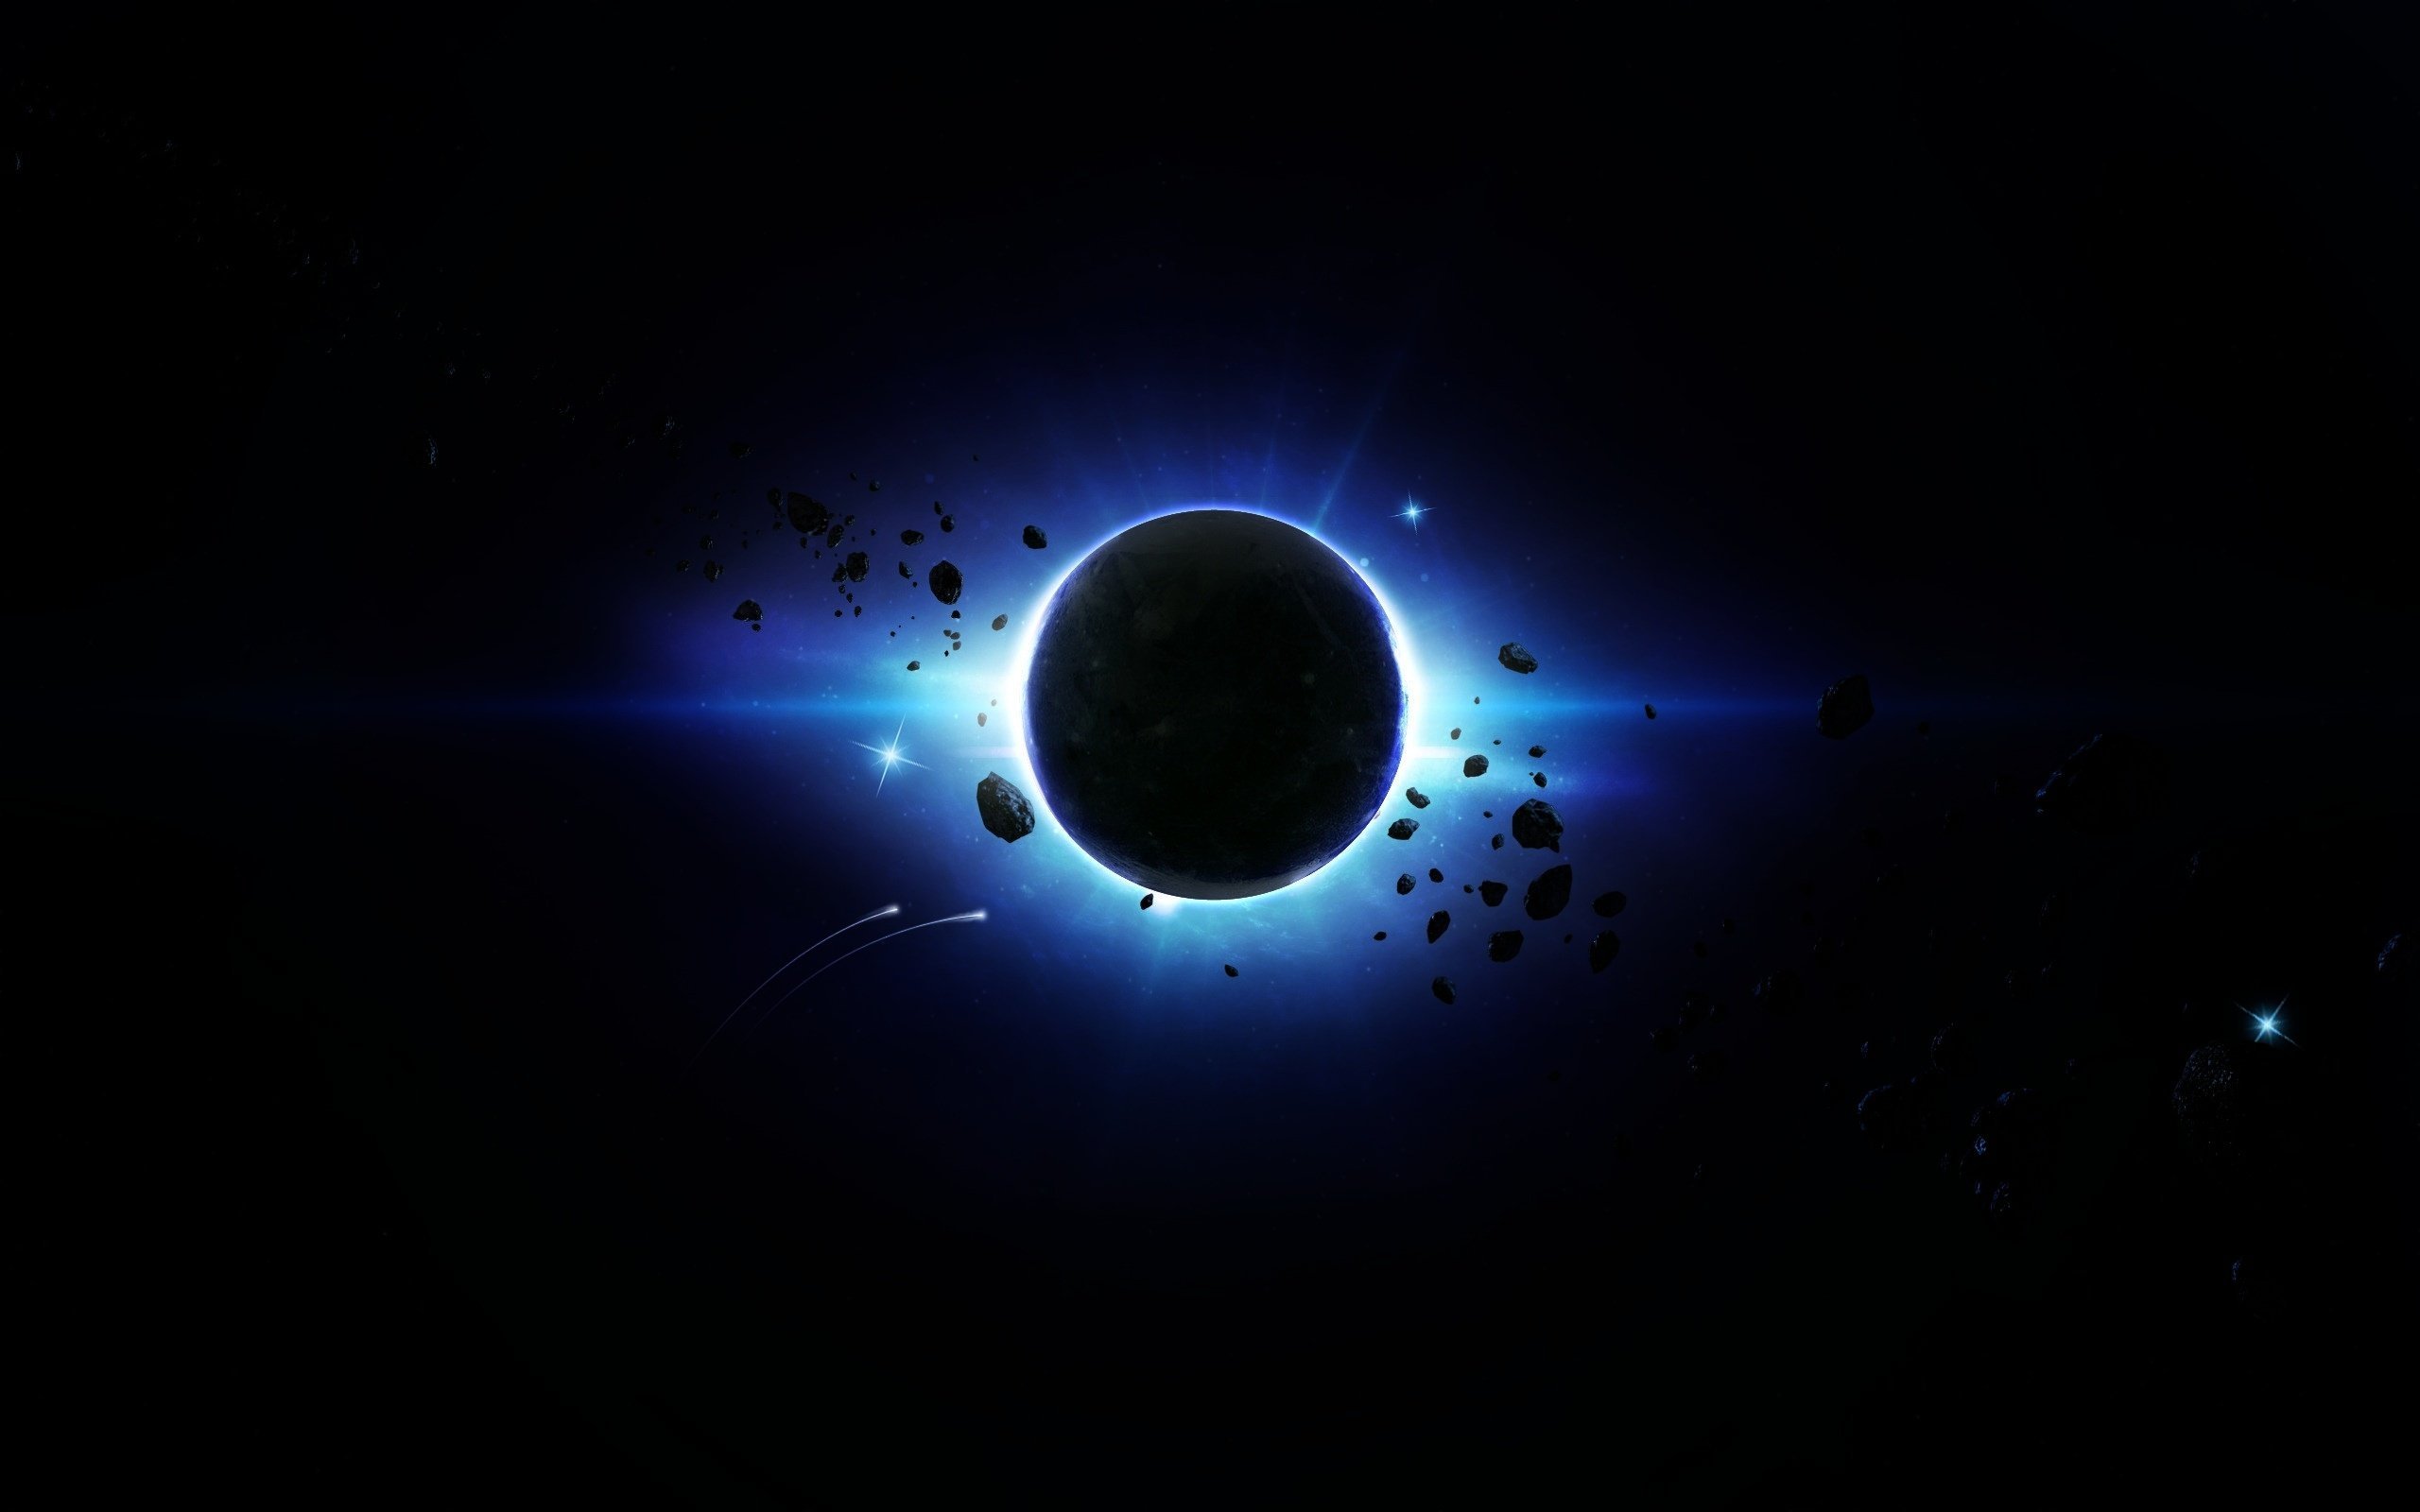 of Eclipse 4K wallpaper for your desktop or mobile screen